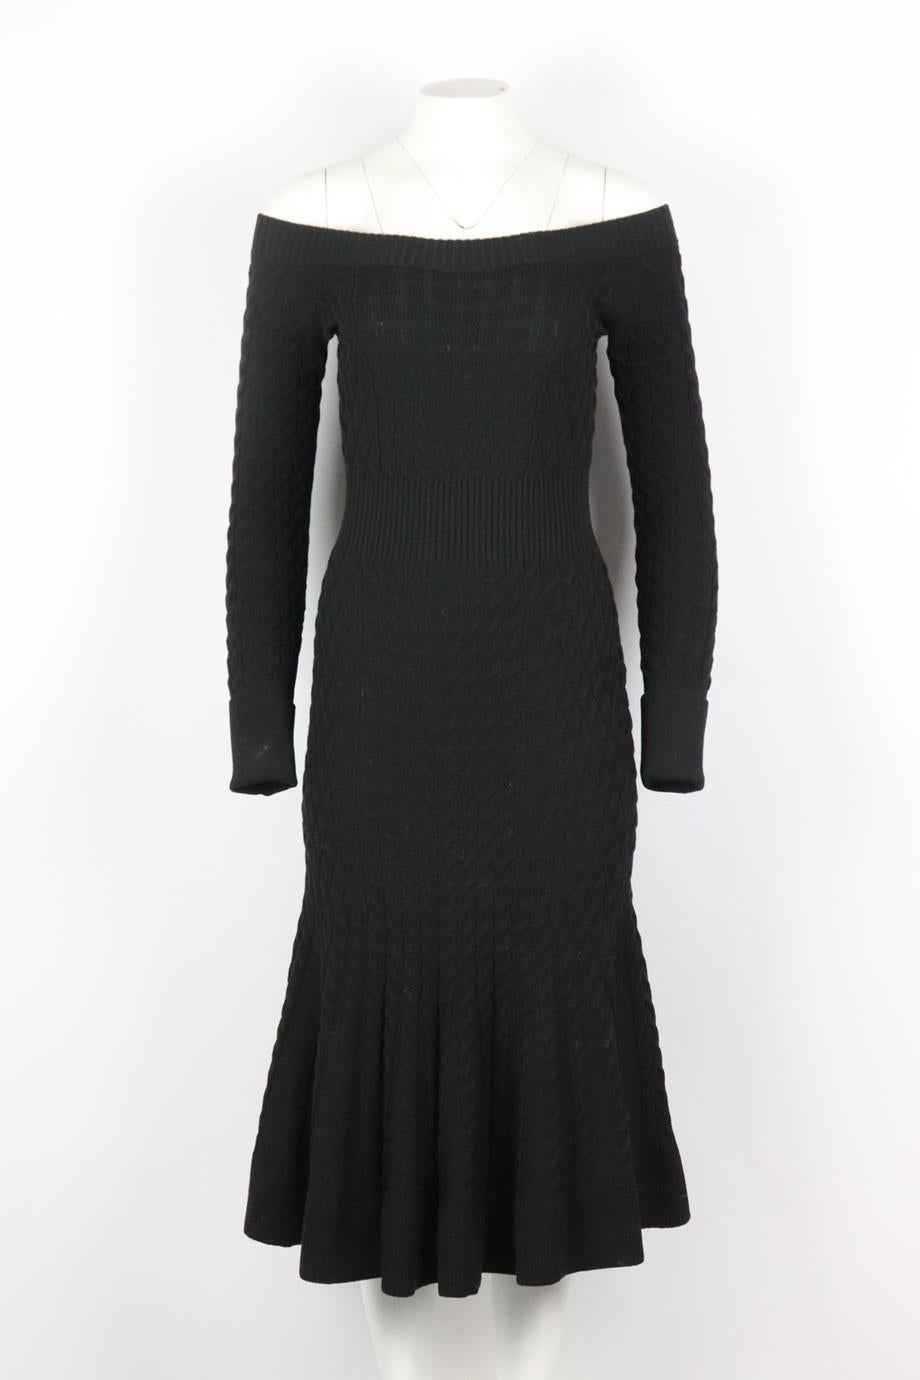 Alexander McQueen off the shoulder cable knit wool blend midi dress. Black. Long sleeve, off-the-shoulder. Slips on. 95% Wool, 5% polyester. Size: IT 42 (UK 10, US 6, FR 38). Bust: 30 in. Waist: 26 in. Hips: 31 in. Length: 42 in. Very good condition